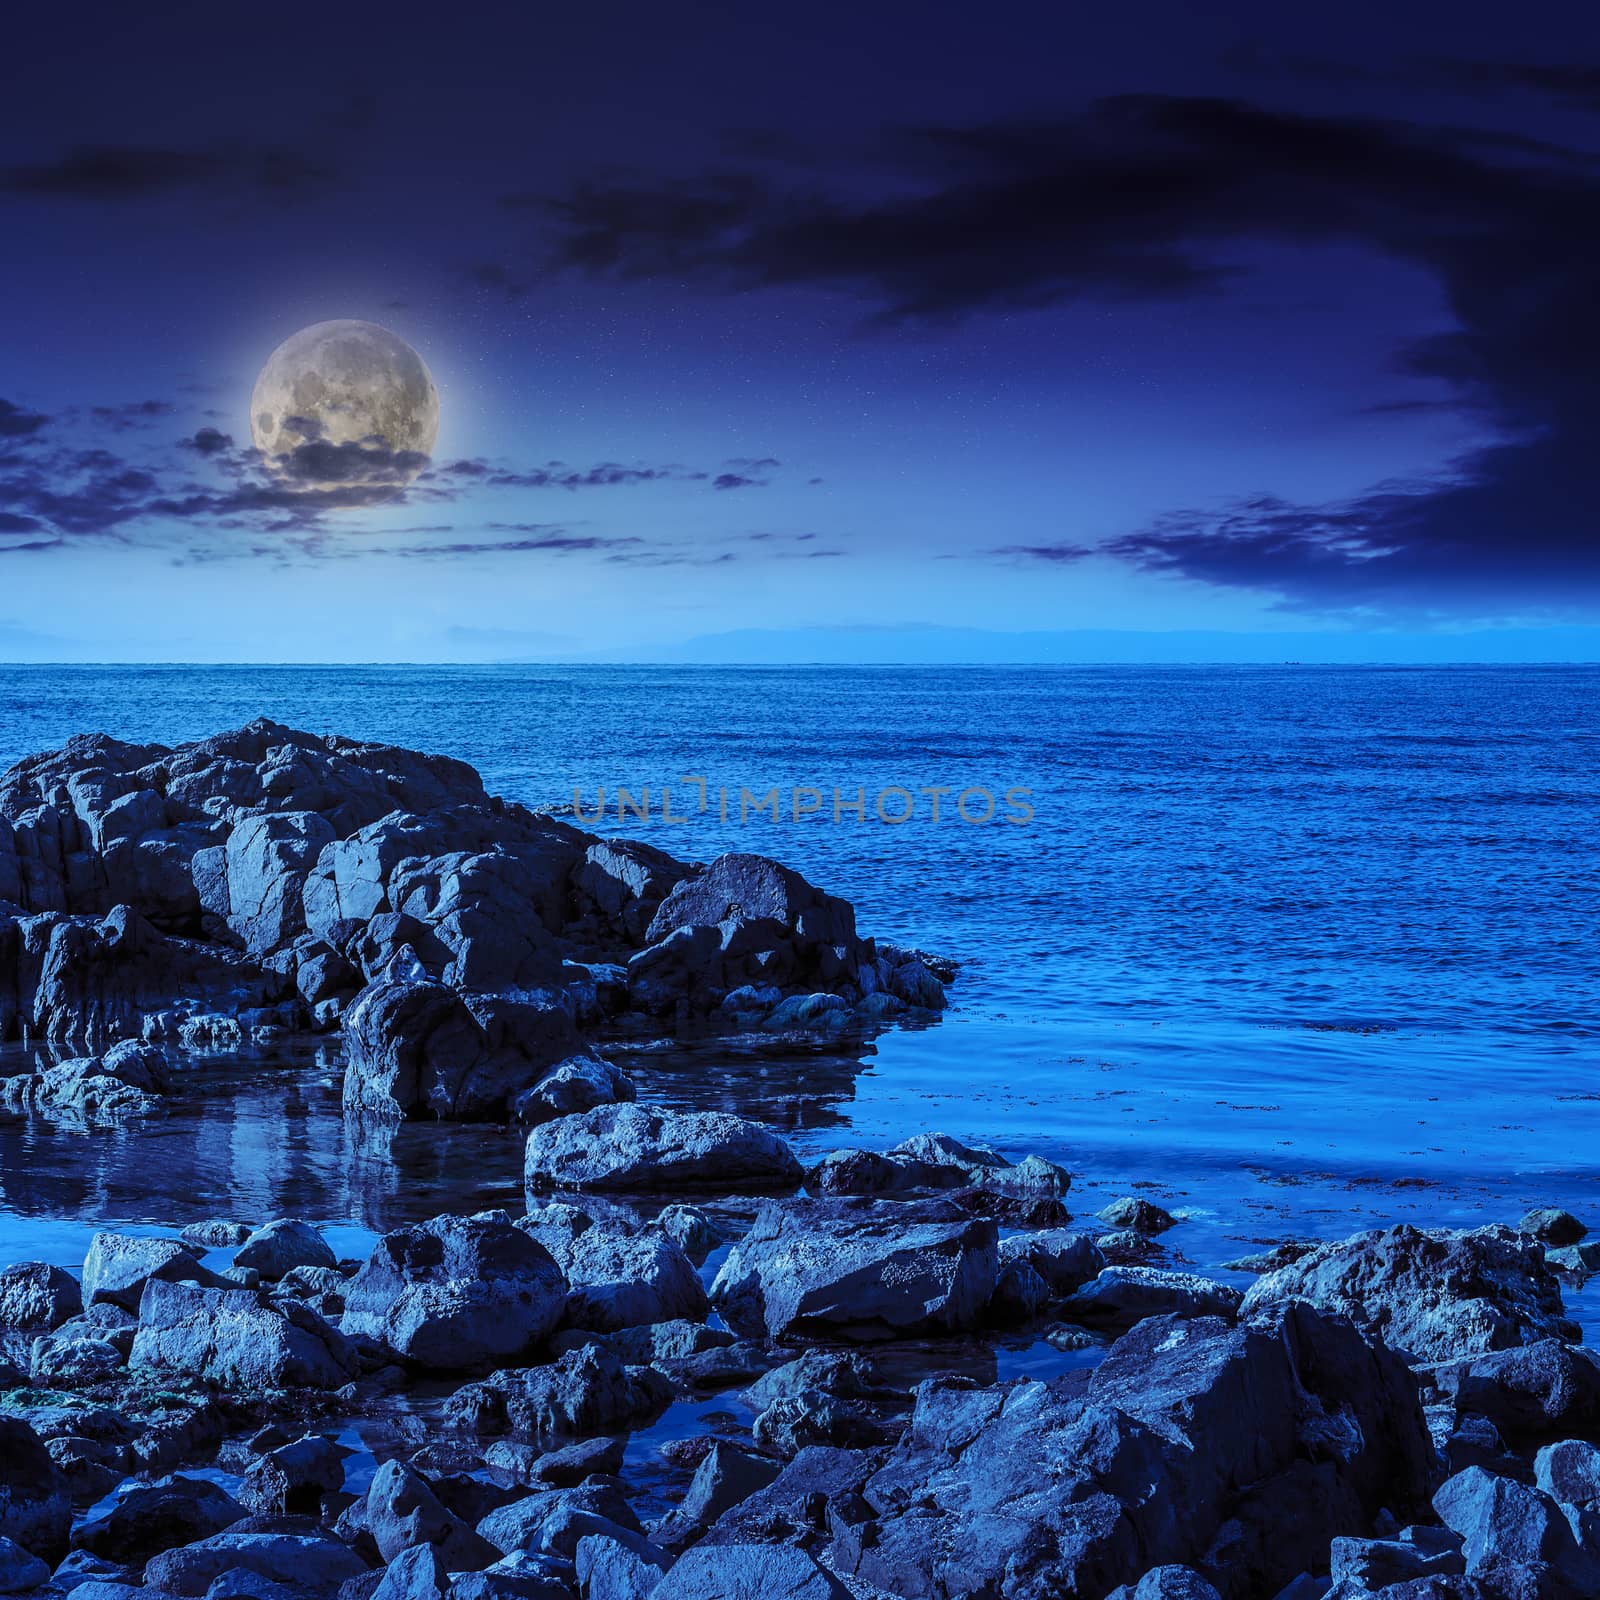 sea wave attacks the boulders and is broken about them at night in moon light